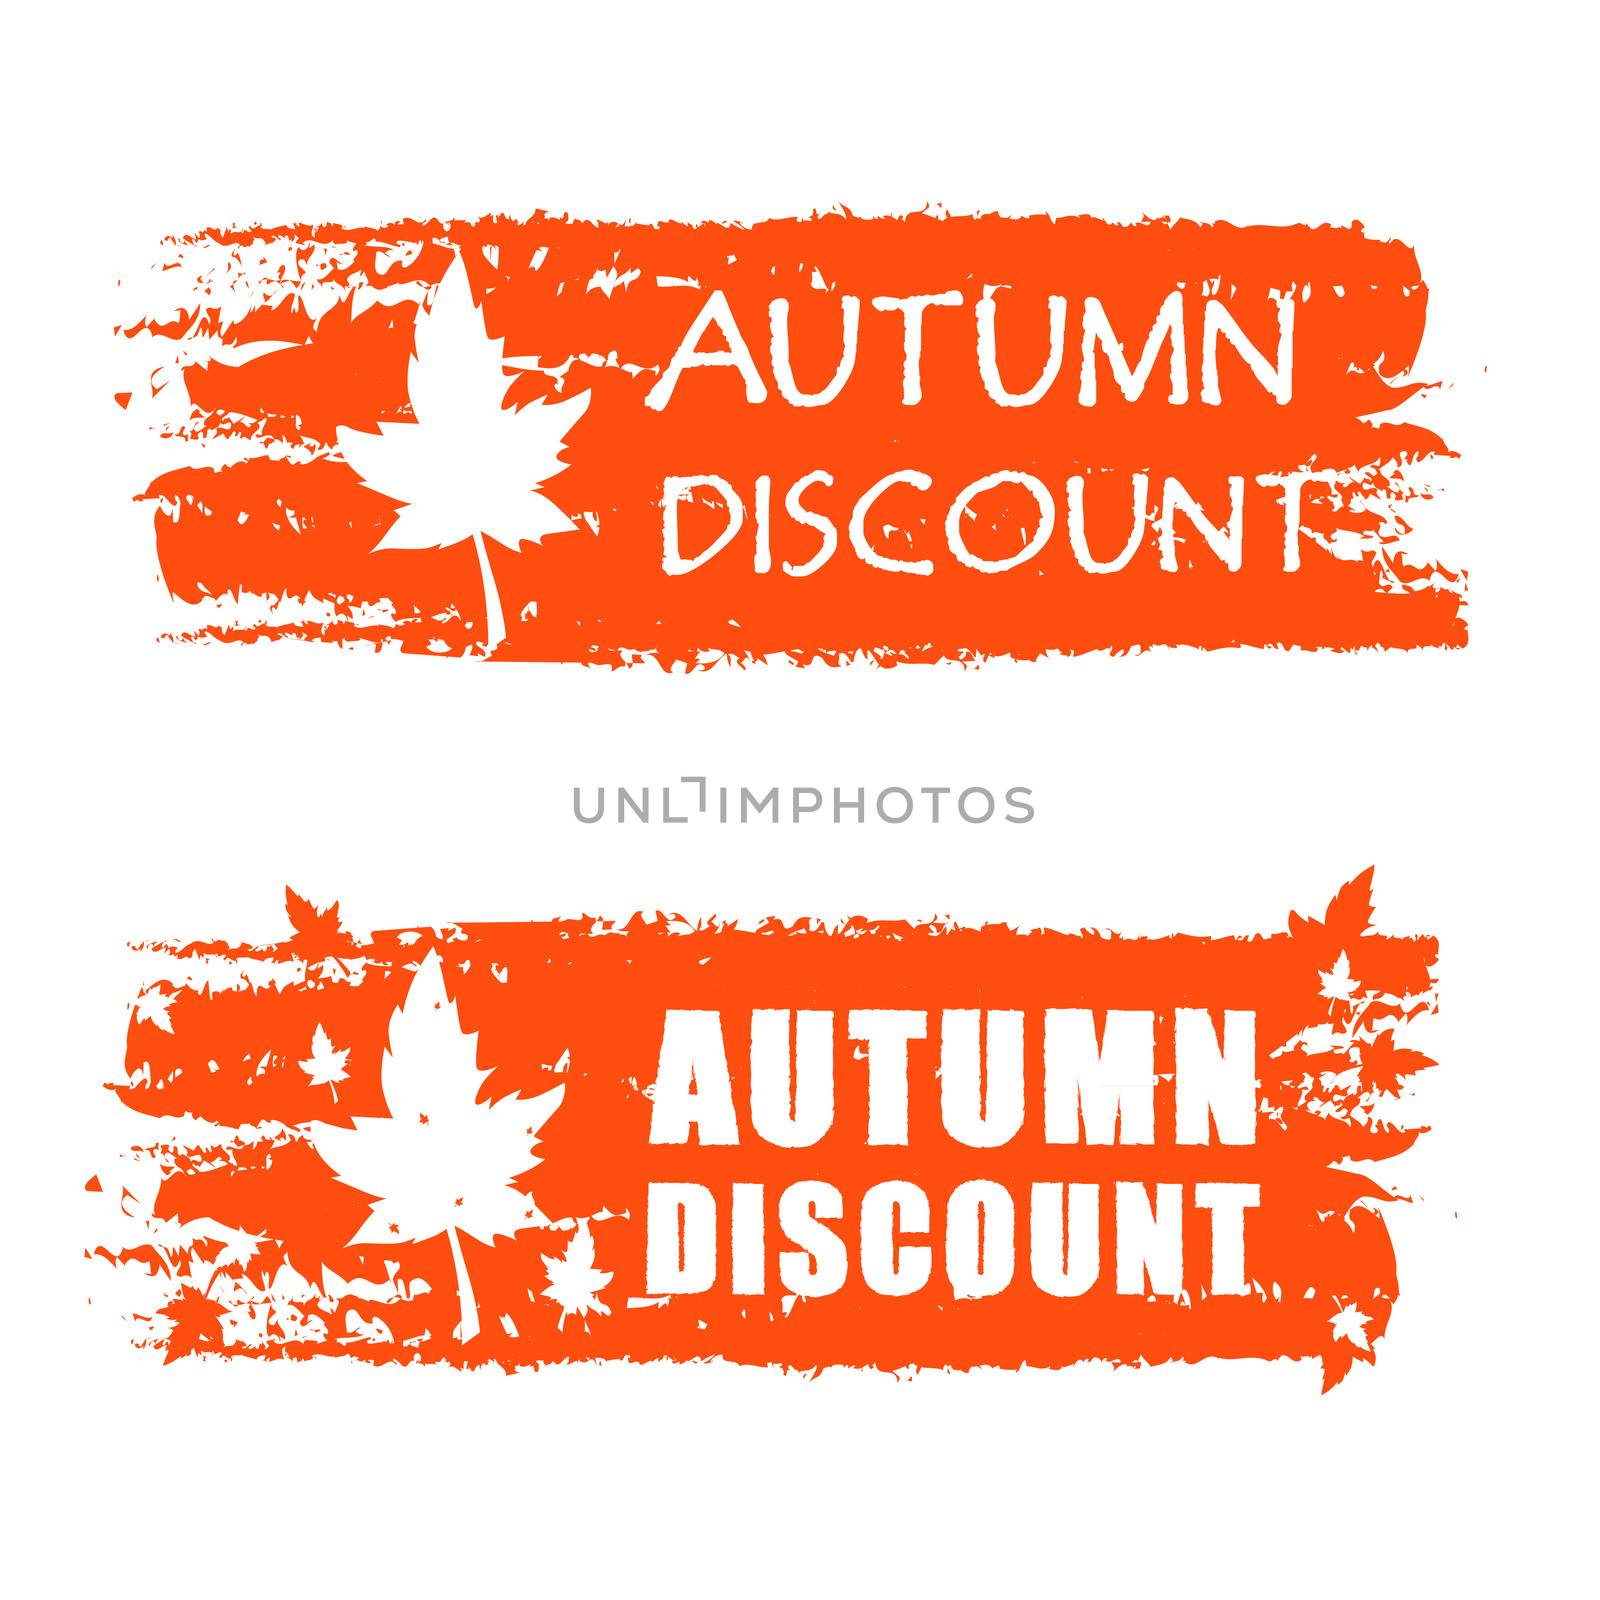 autumn discount - orange drawn banner with text and fall leaf, business concept